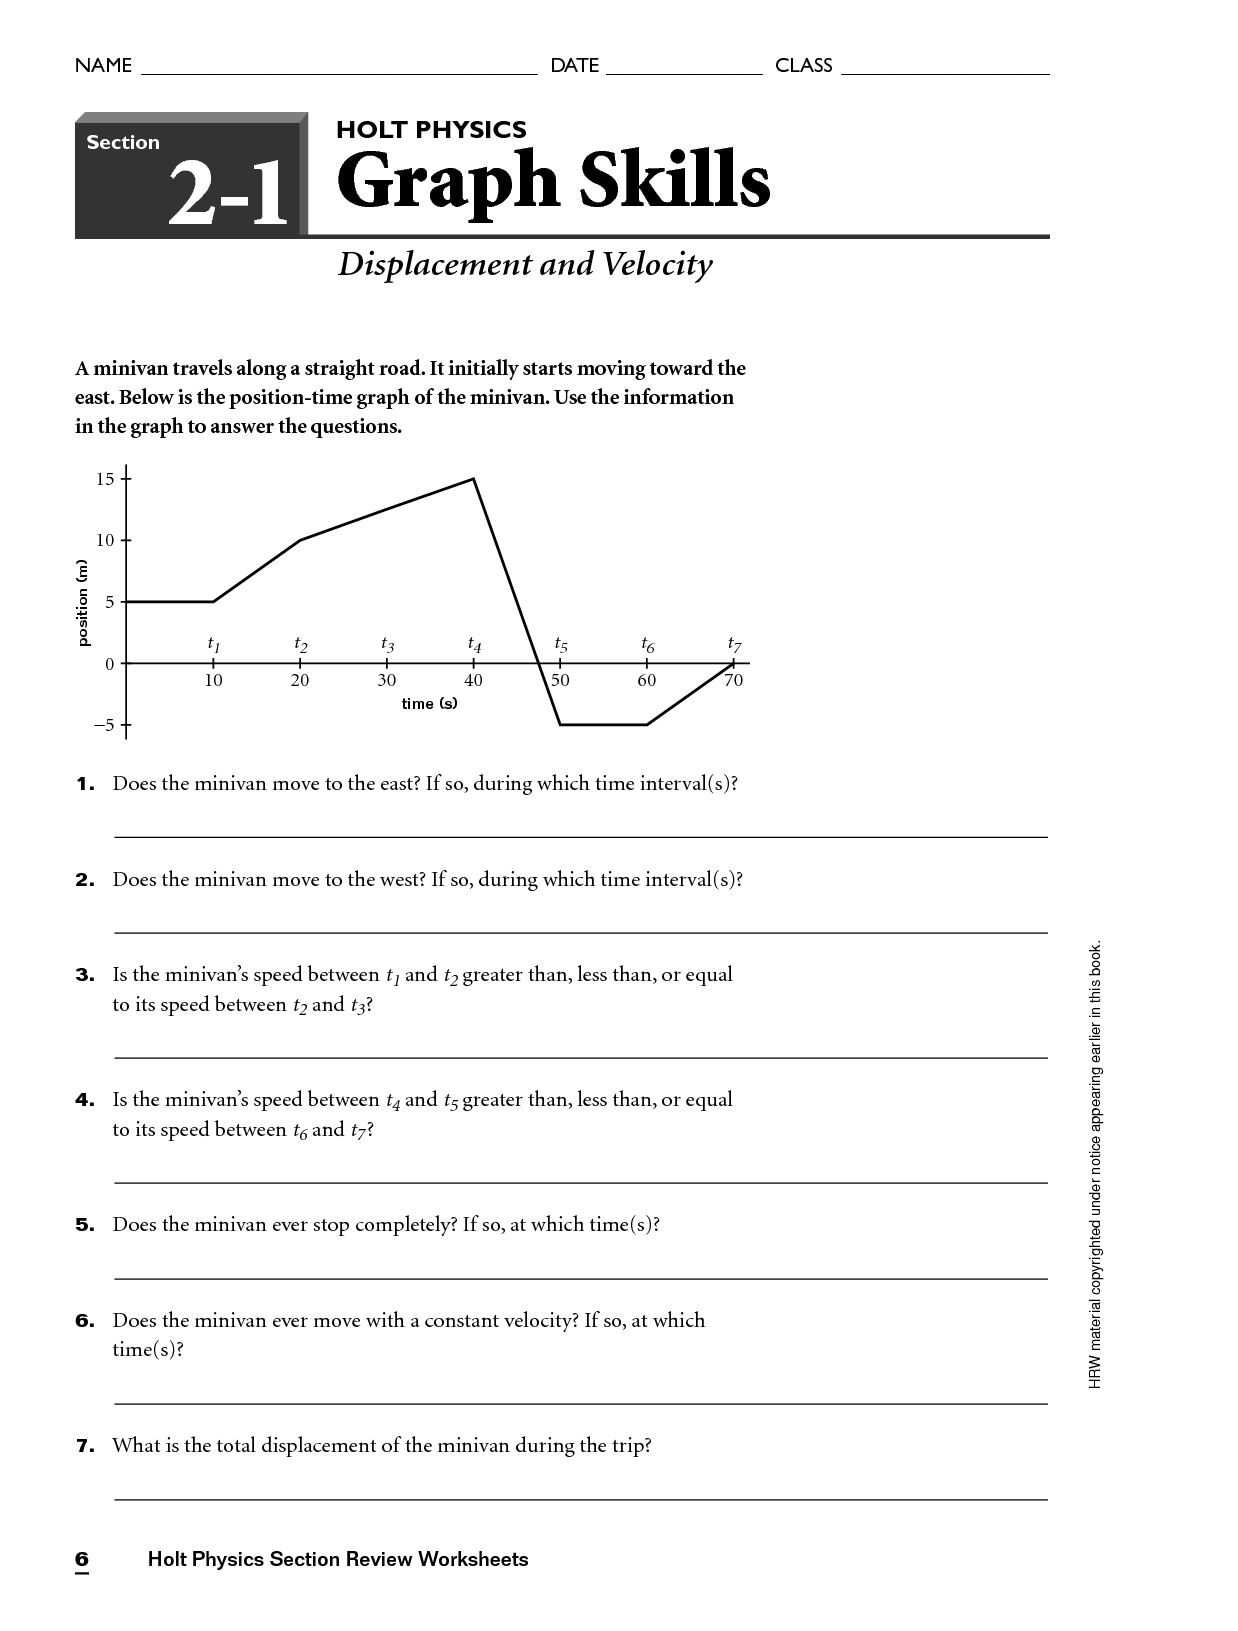 Get The Message Worksheet Answers